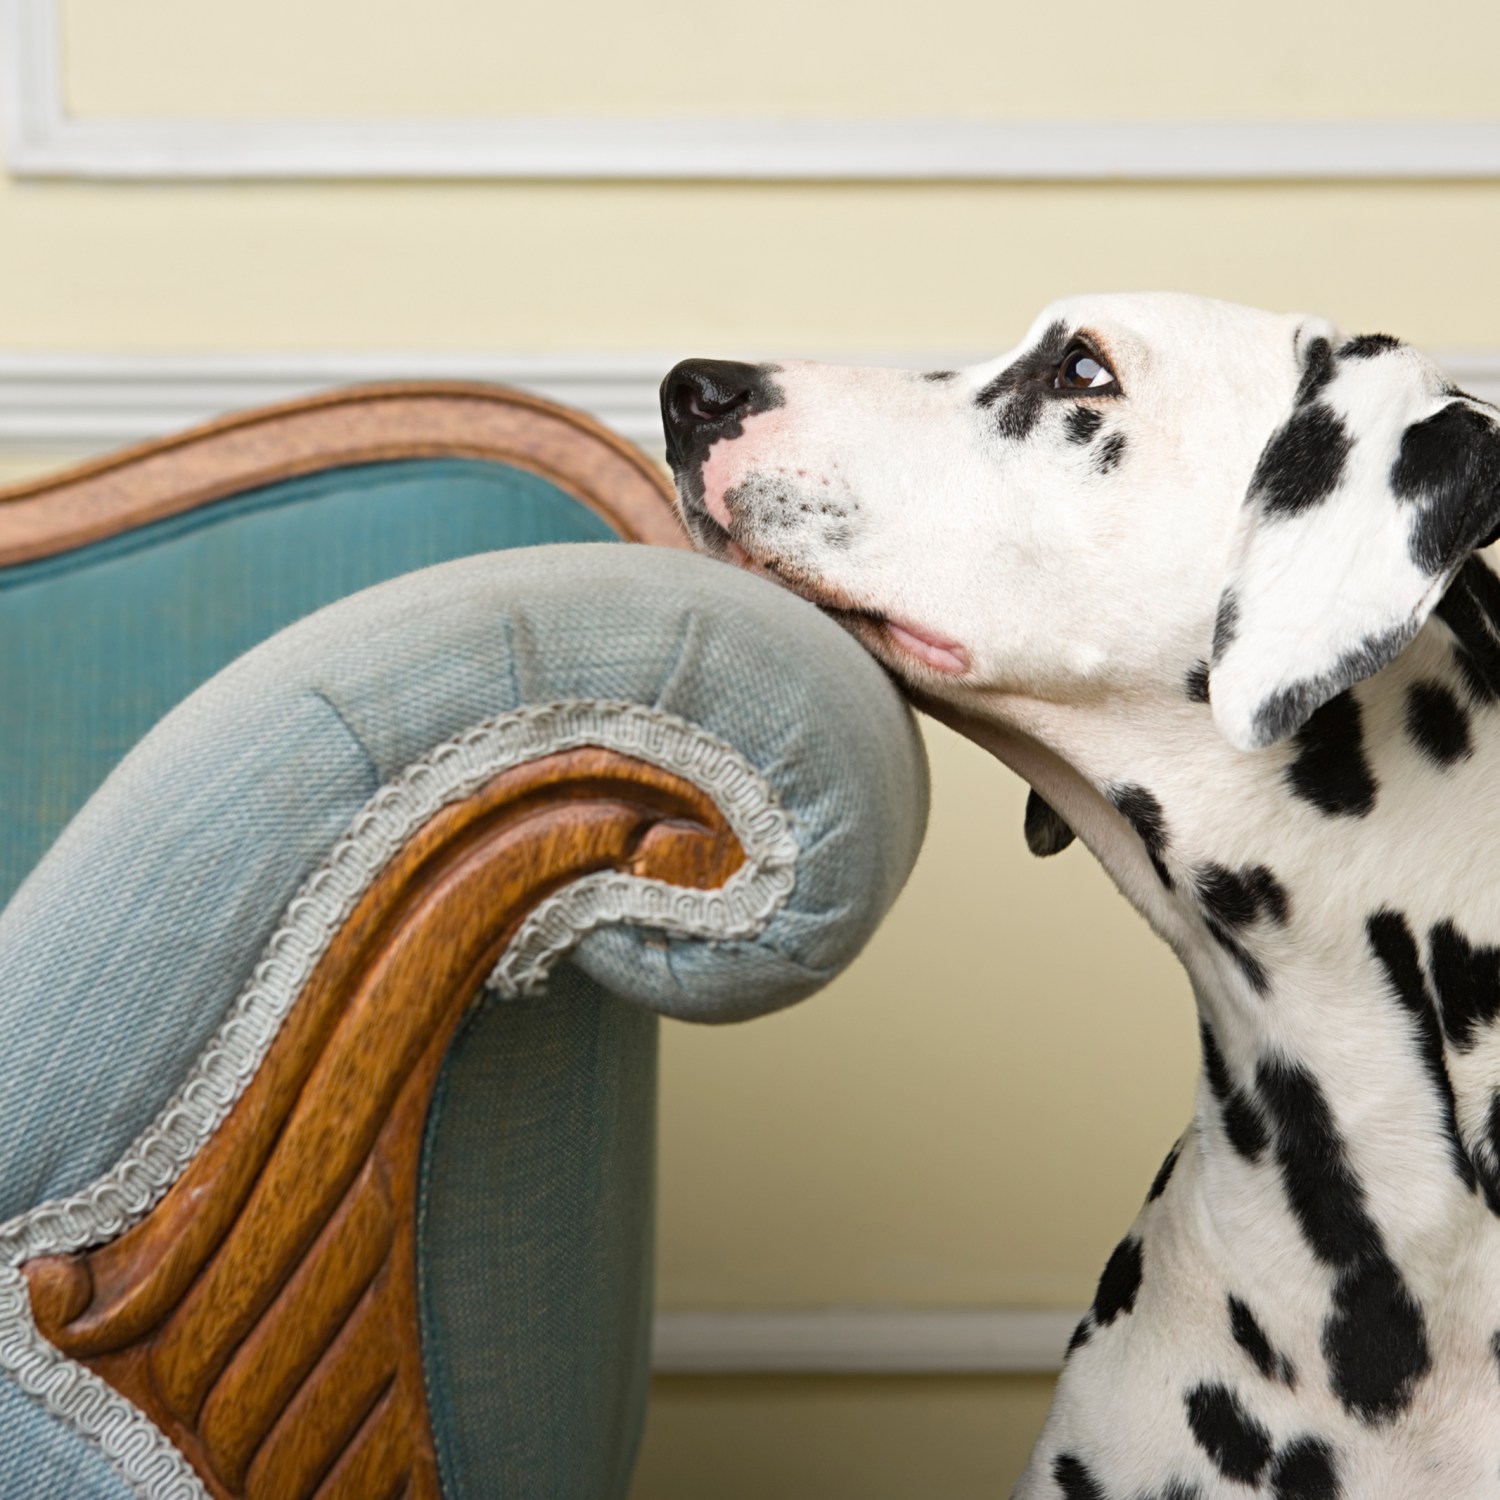 pet-friendly-homes-make-dogs-happy-dalmation-head-on-couch